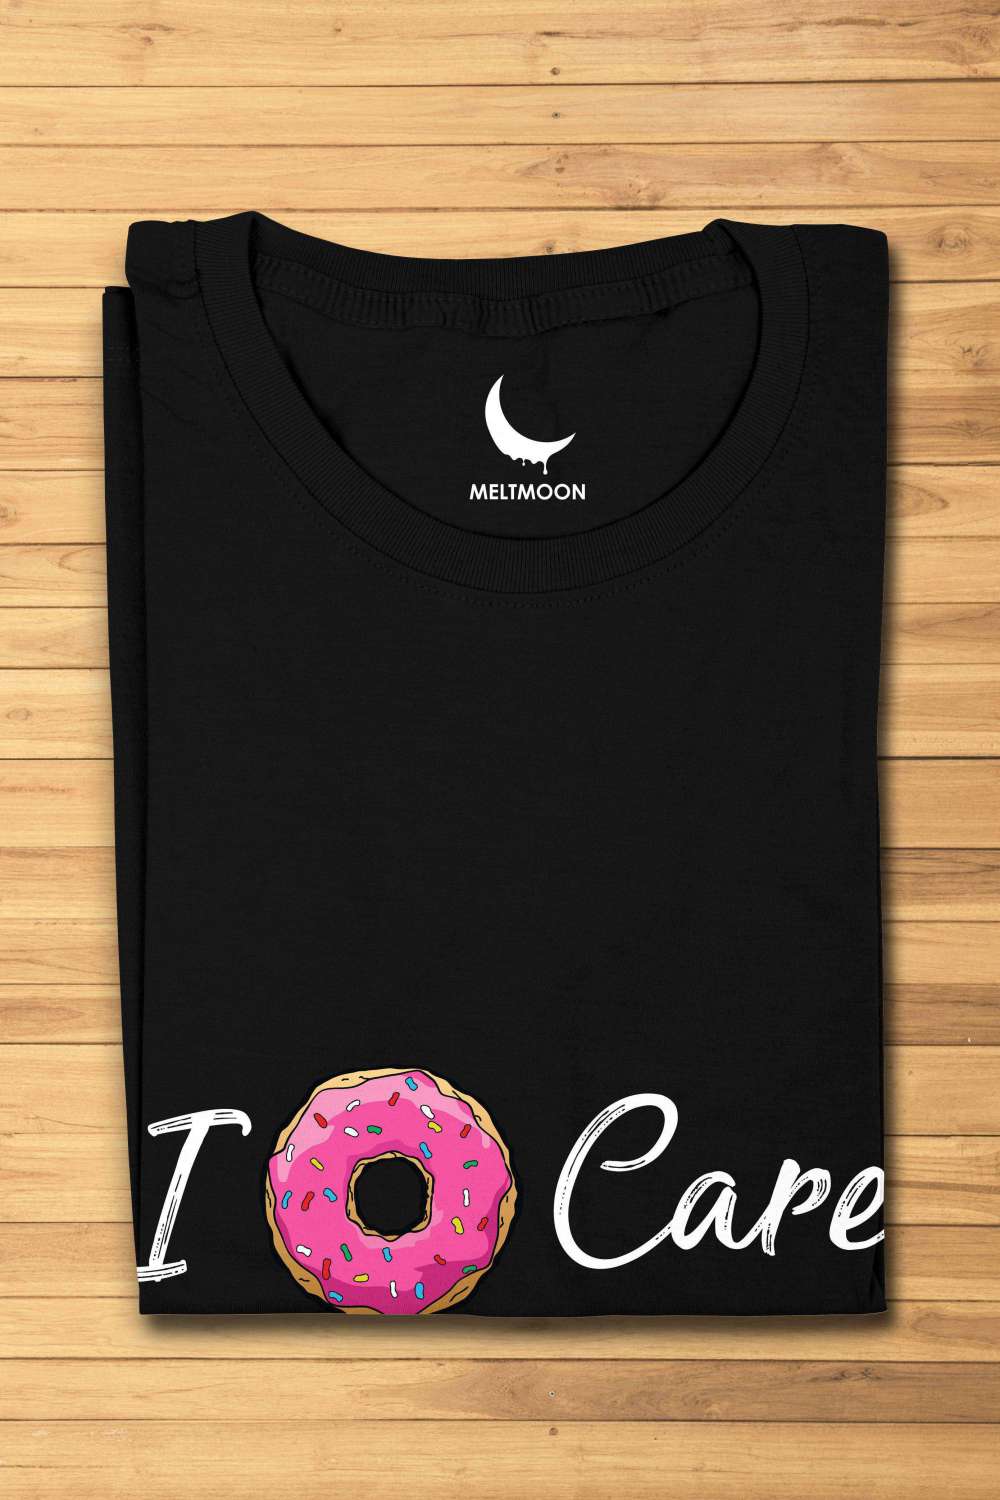 I Donut Care Graphic T-shirt